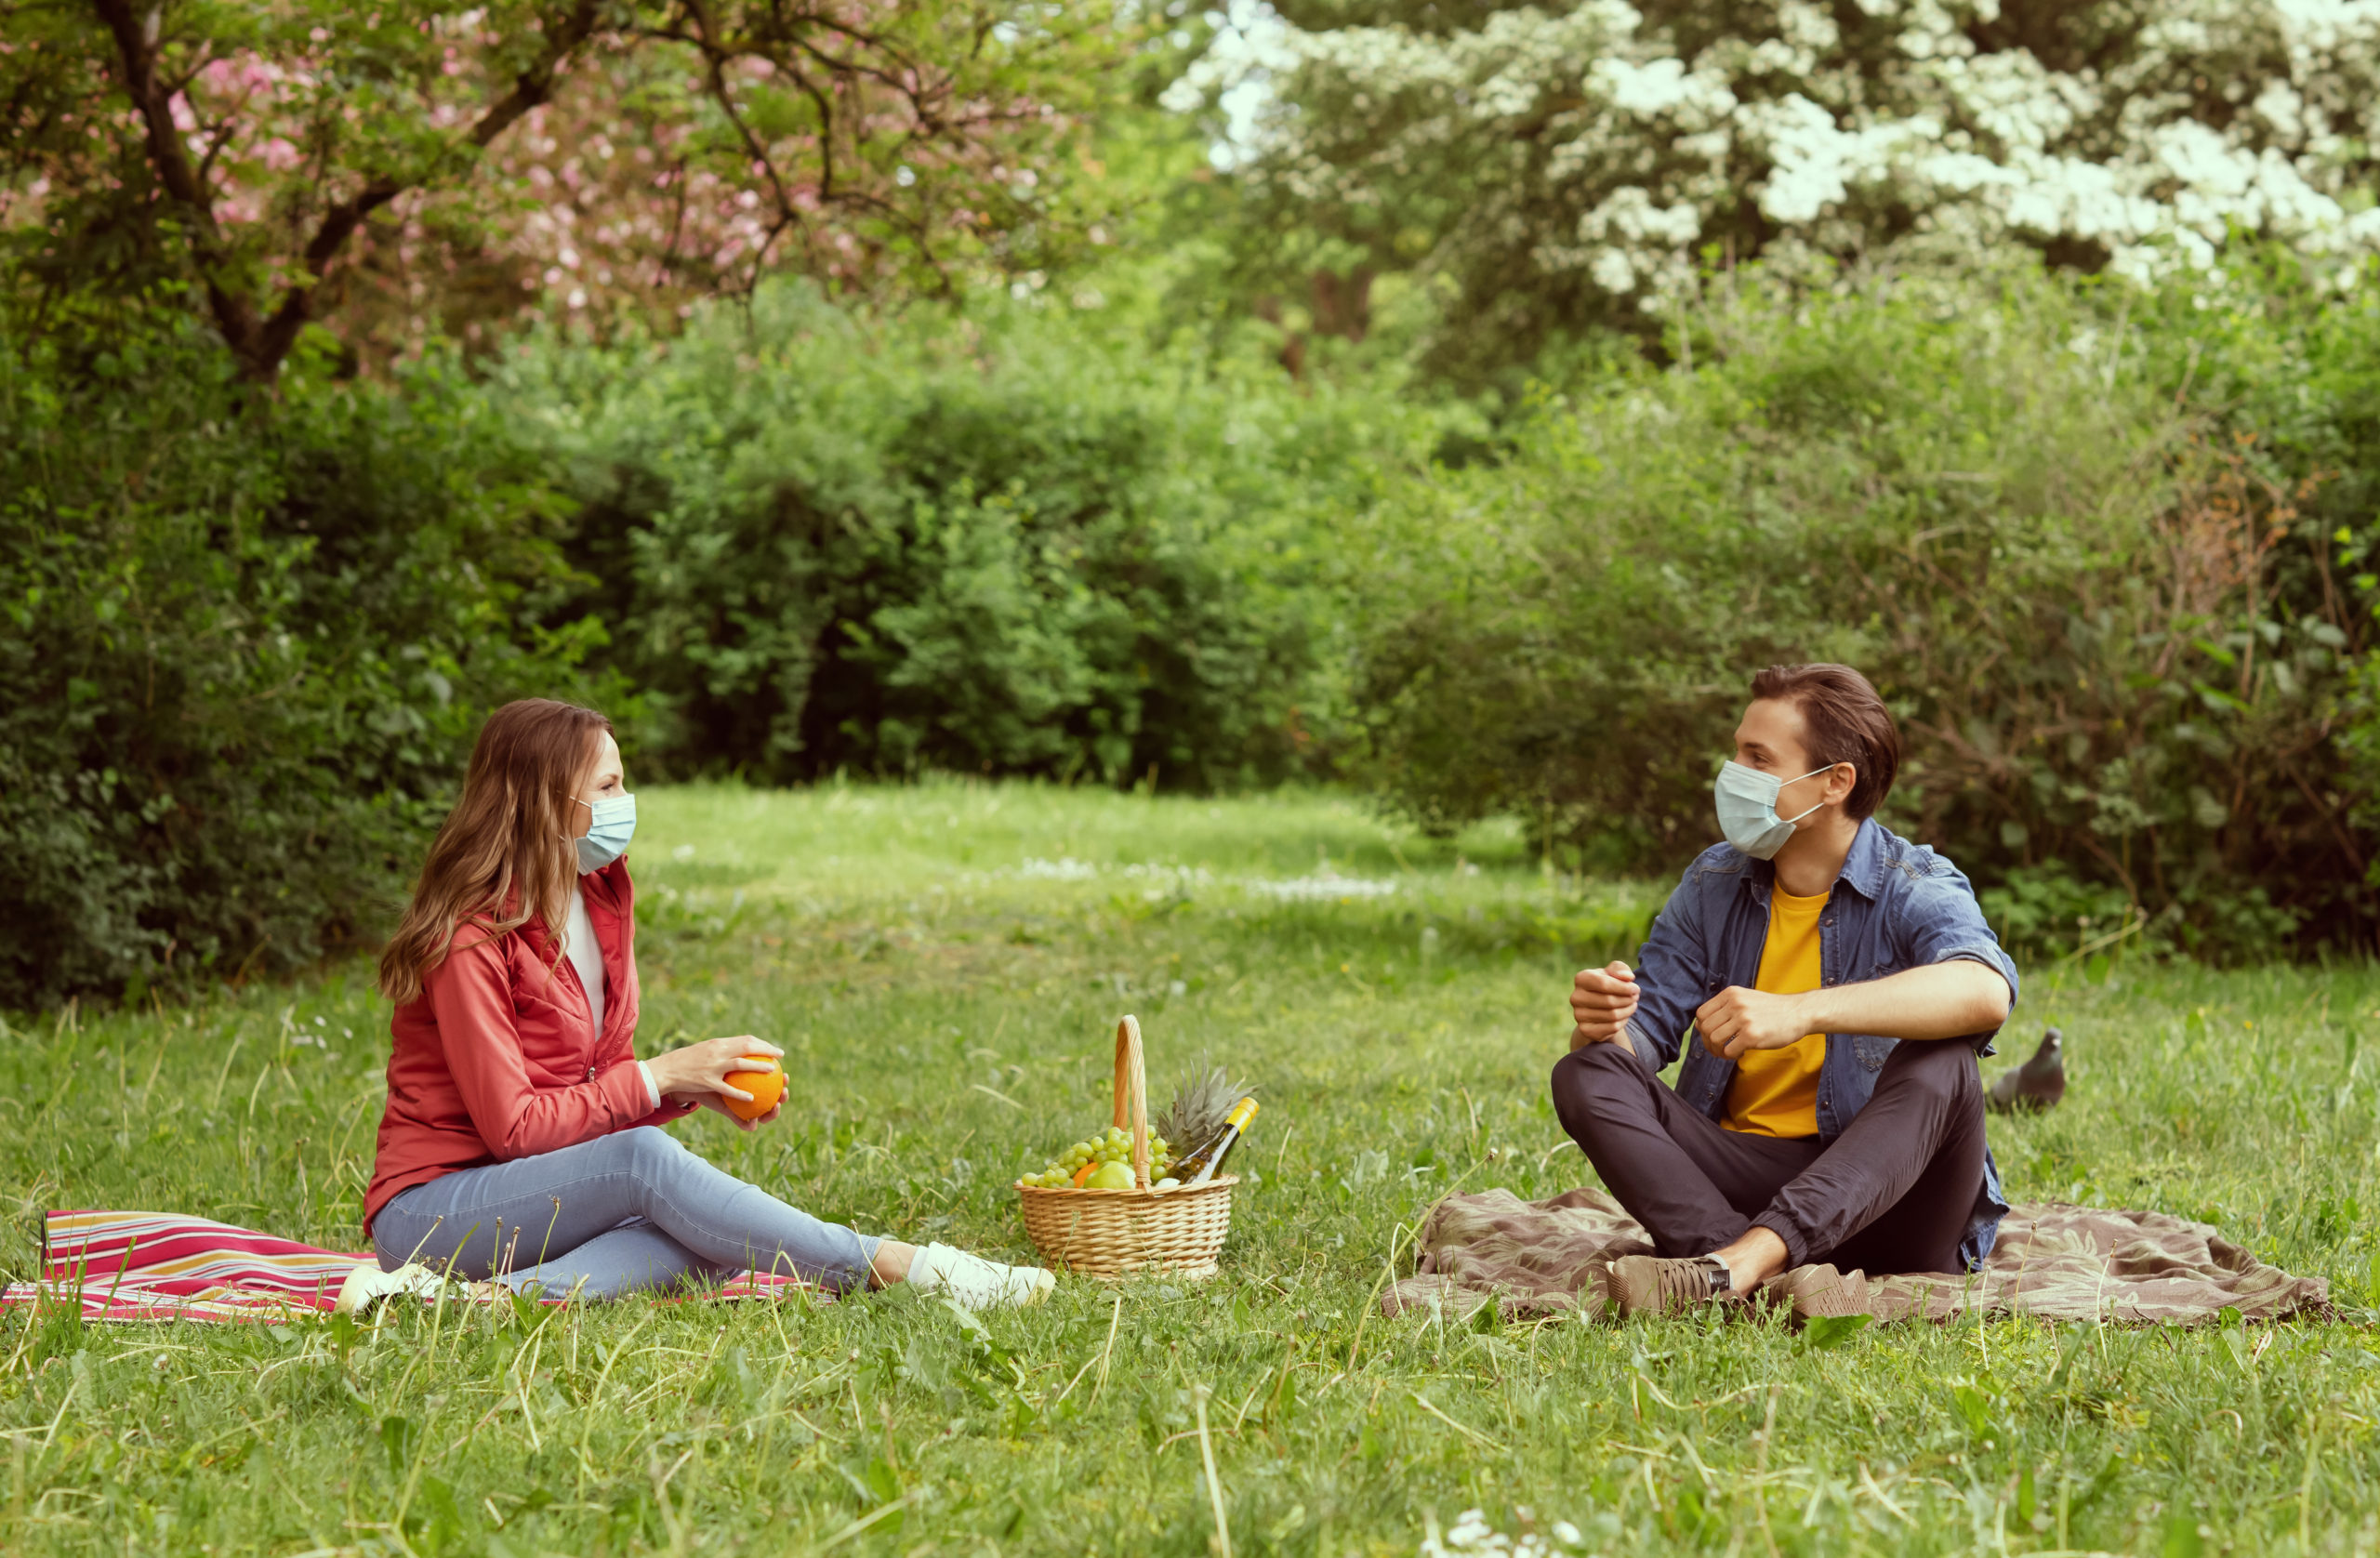 two people sitting in a park having a picnic practicing social distancing and wearing face masks